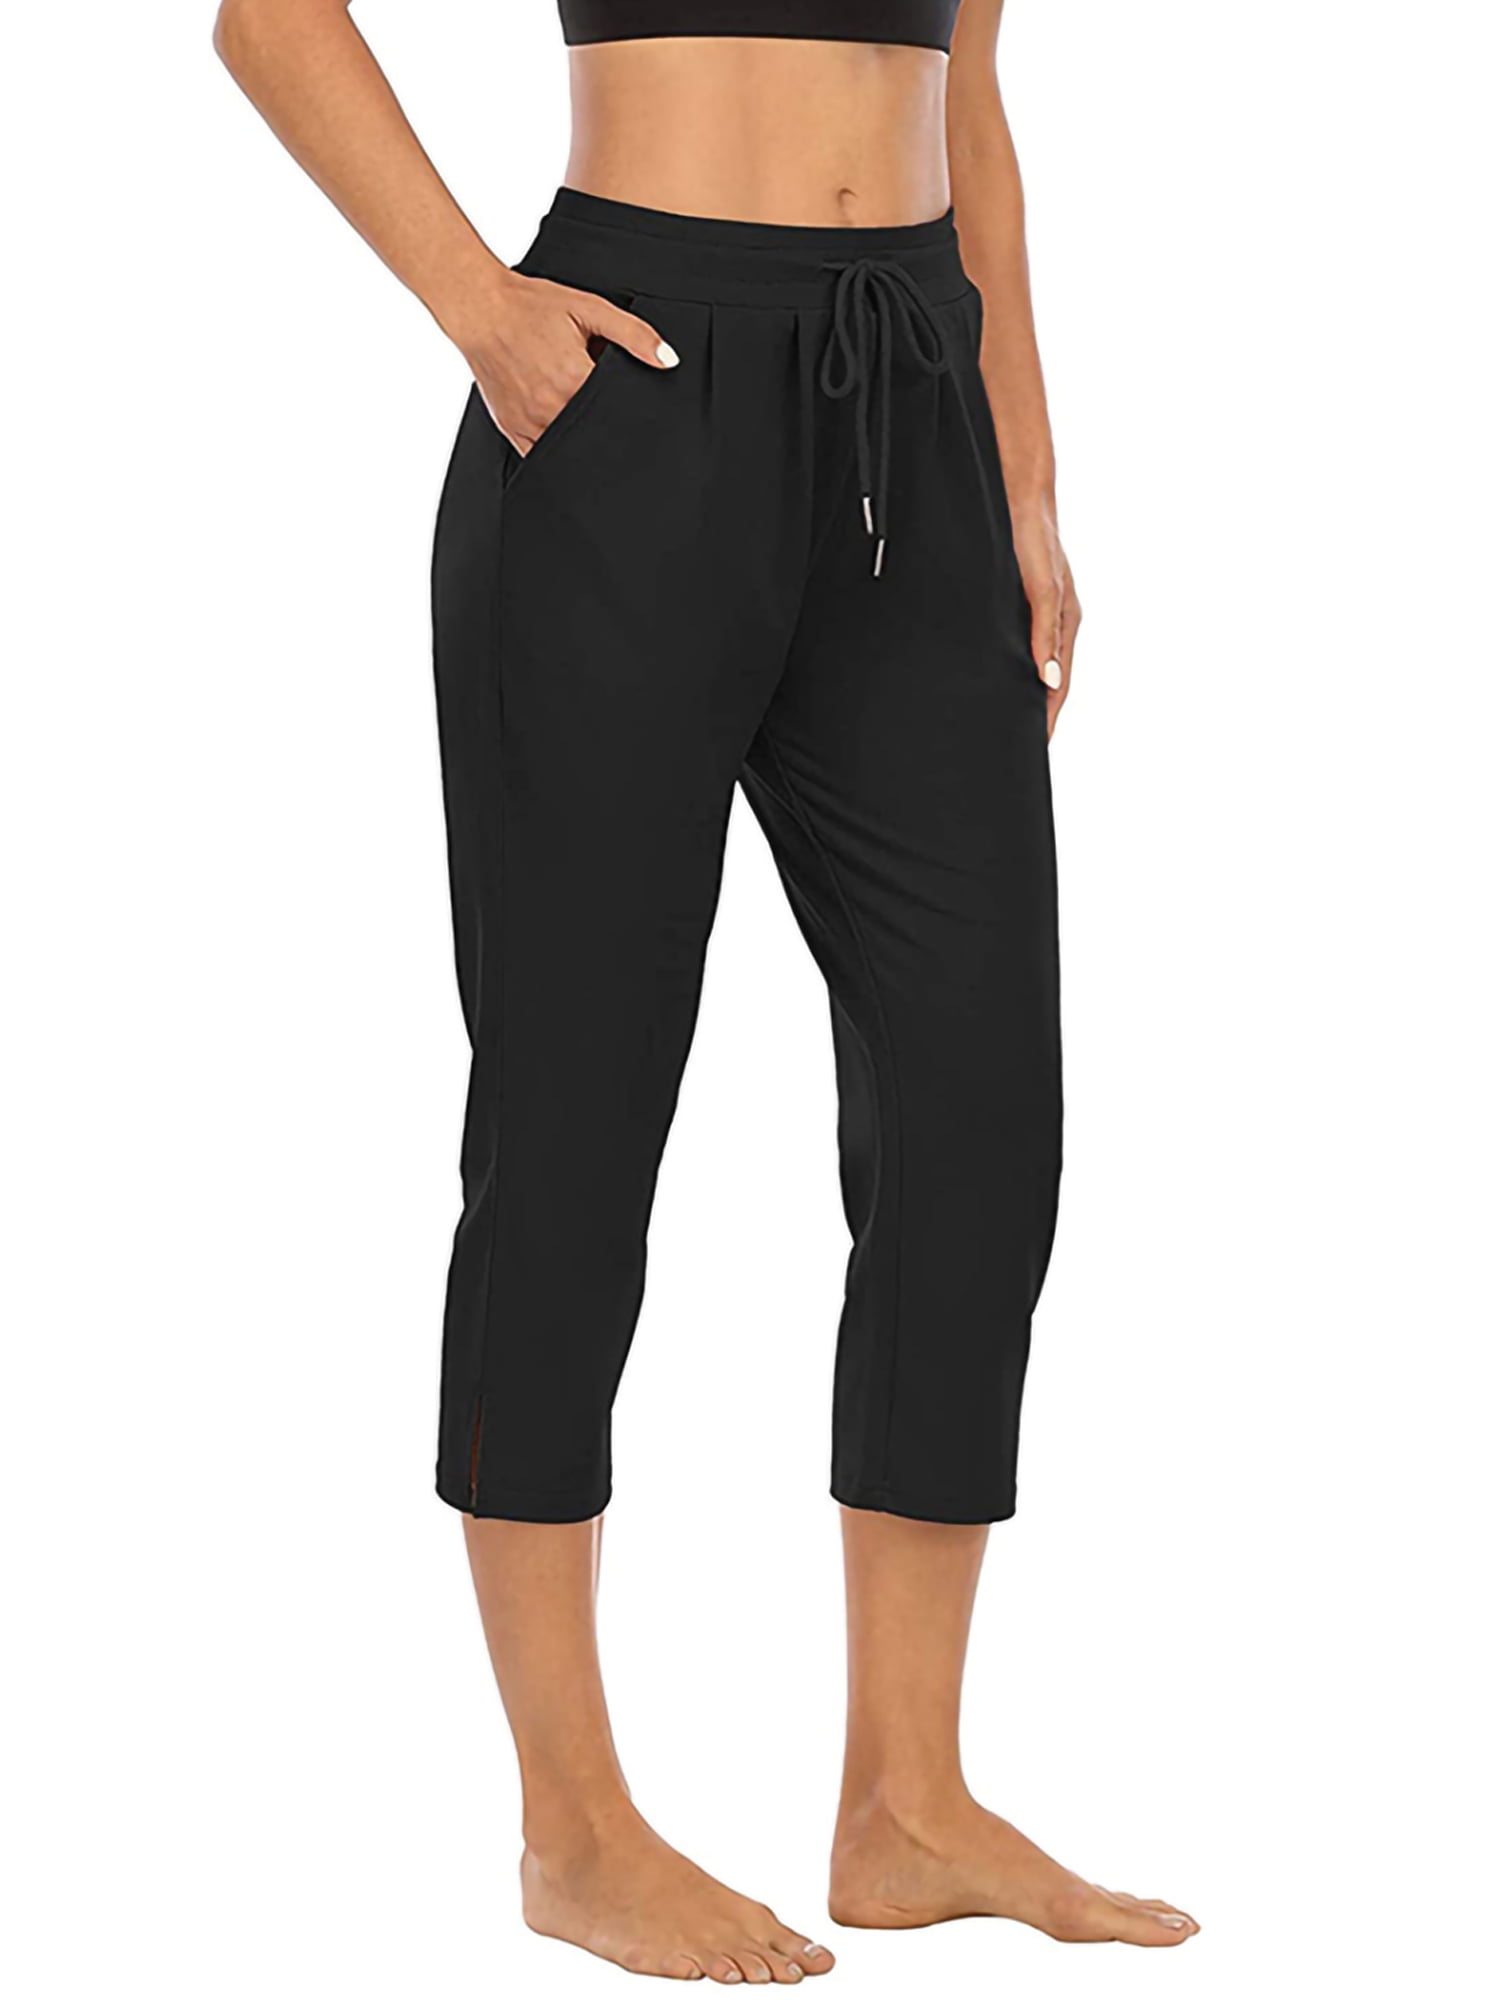 Details about   Women's Fitness Sport Yoga Pants Push Up Leggings with Pocket Running Sportswear